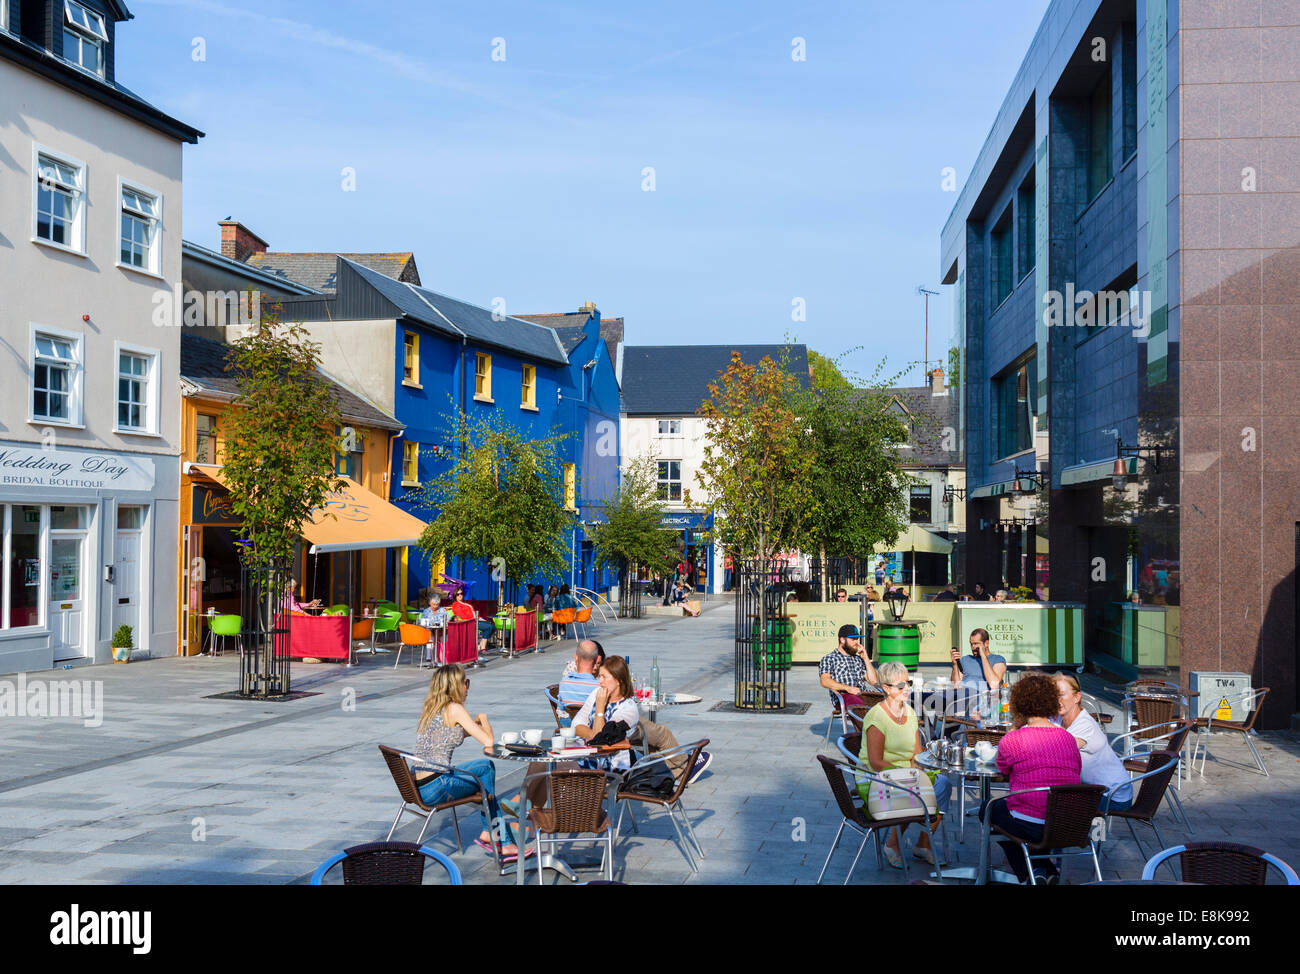 Cafes and restaurants on Trimmers Lane in the Selskar area, Wexford Town, County Wexford, Republic of Ireland Stock Photo